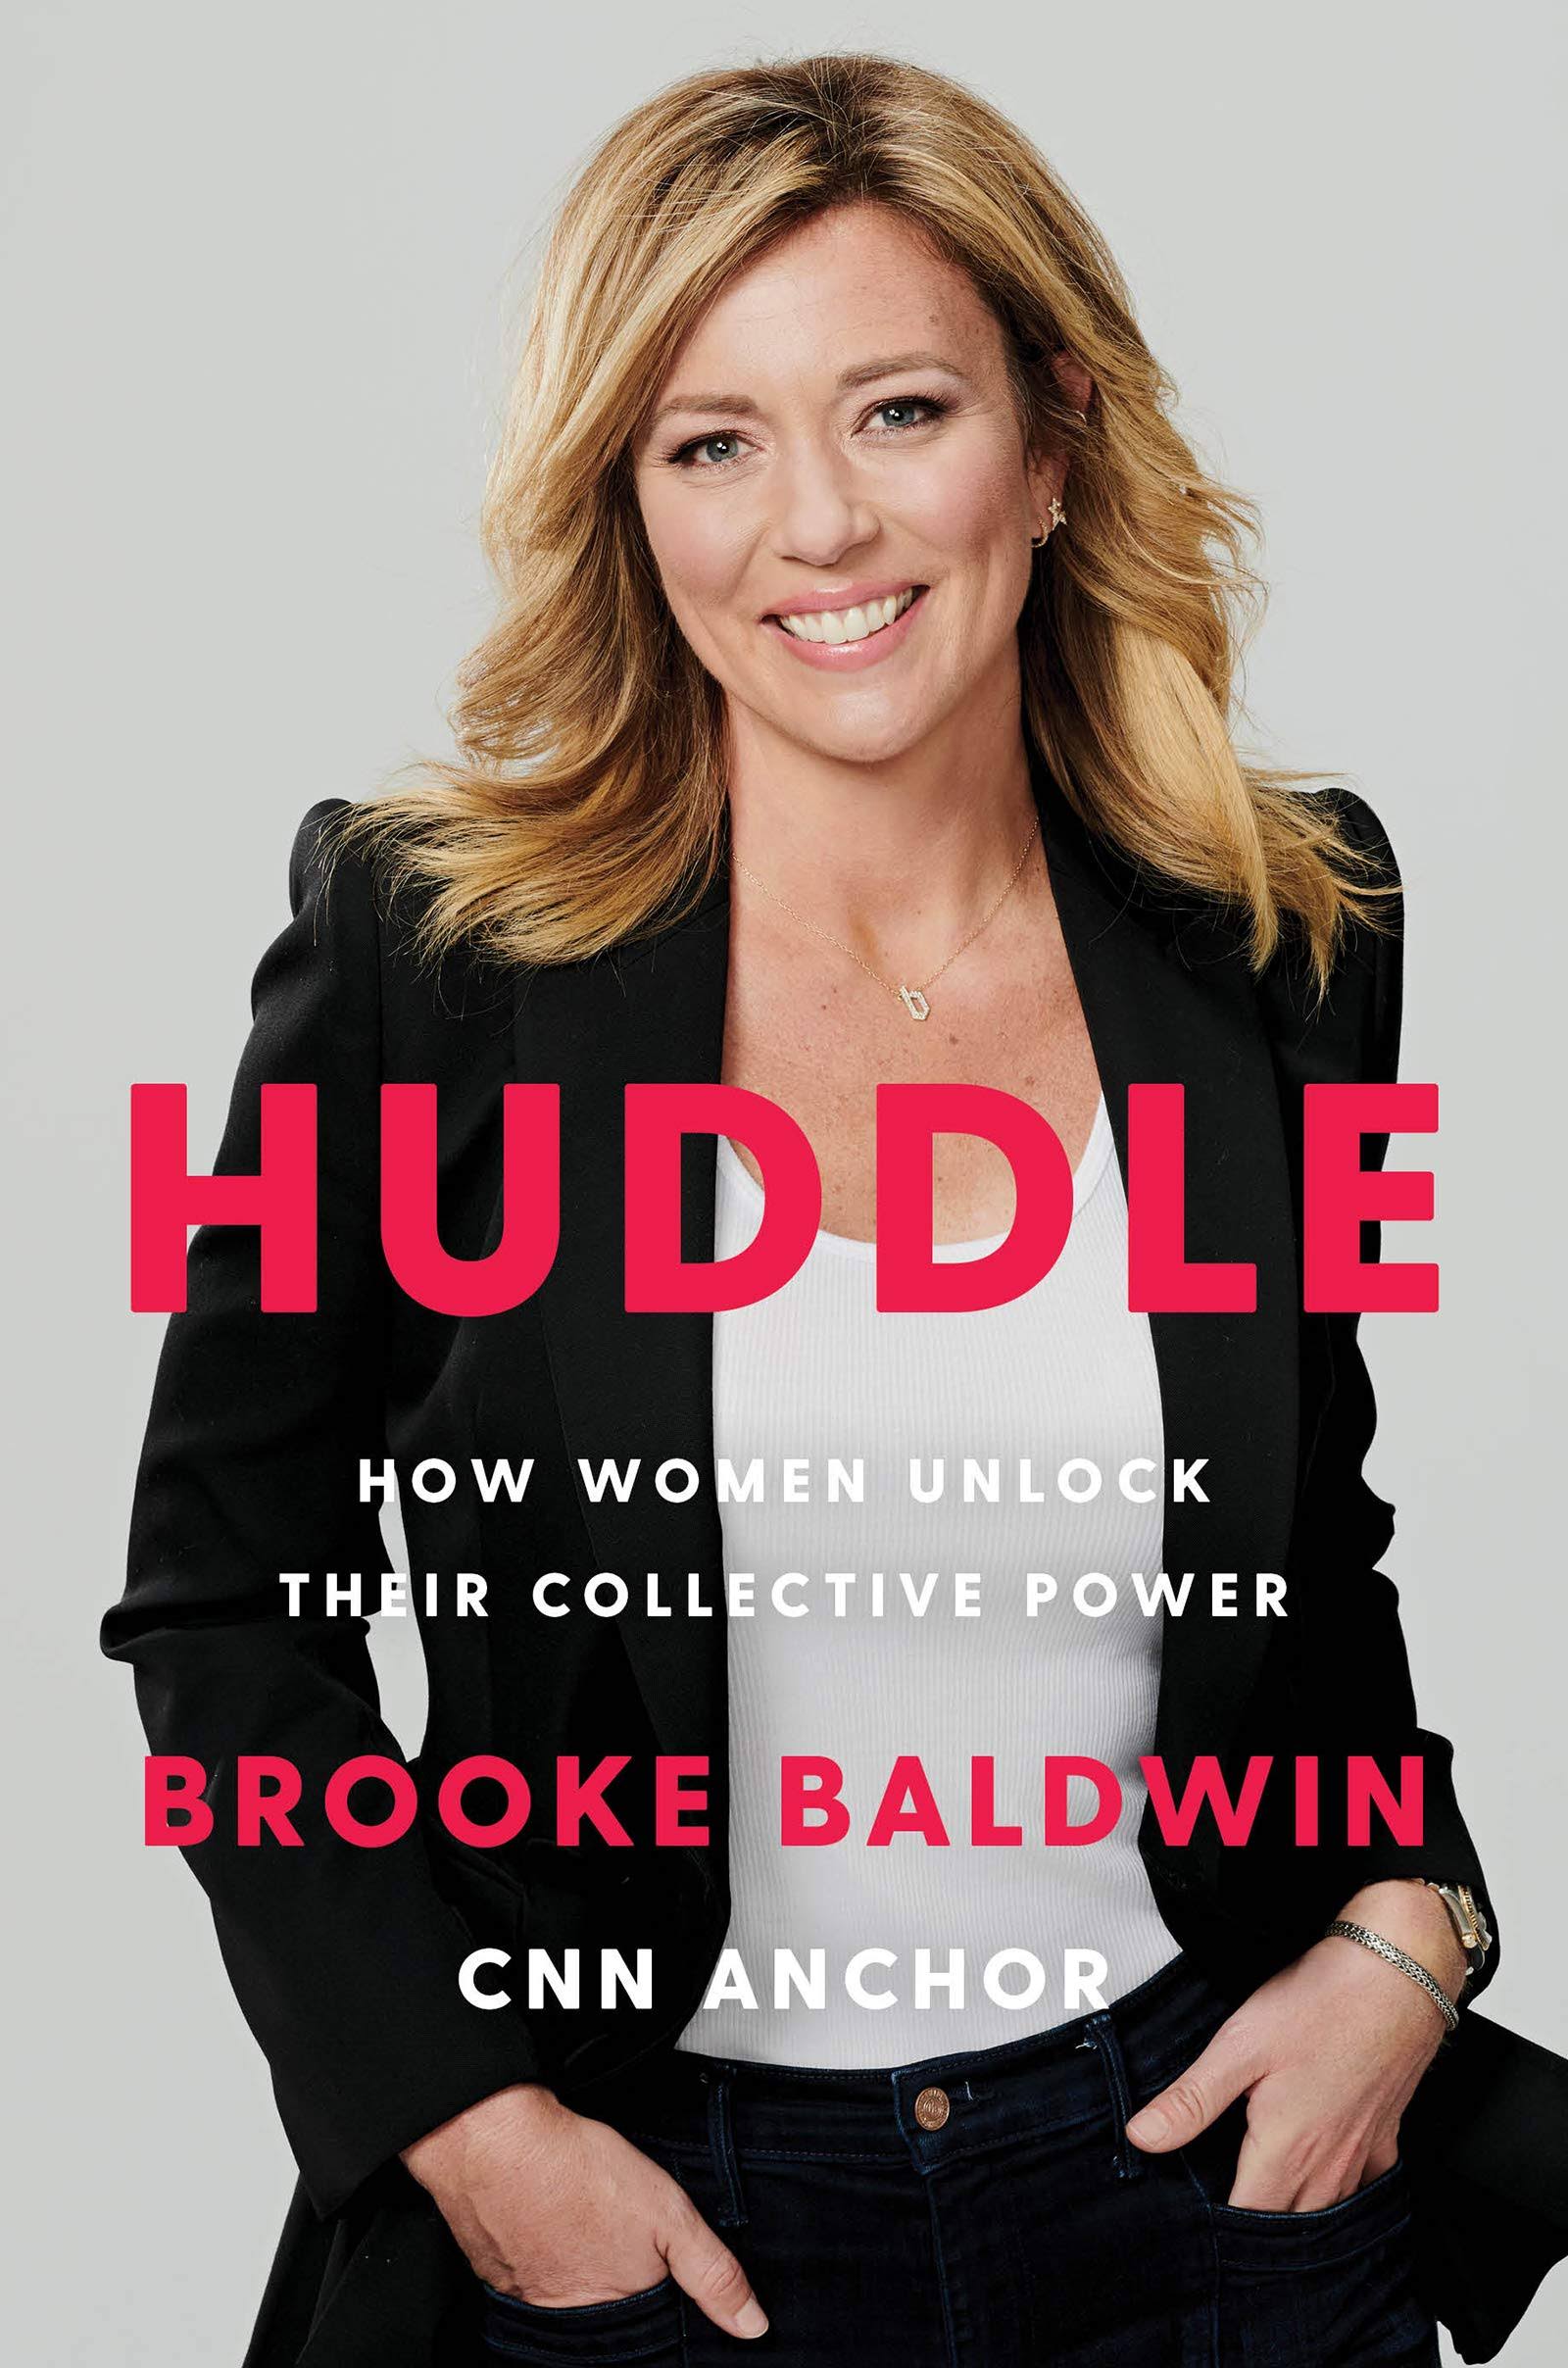 Cover Image of the Book Huddle How Women Unlcok Their Collective Power by Brooke Baldwin Cnn Anchor